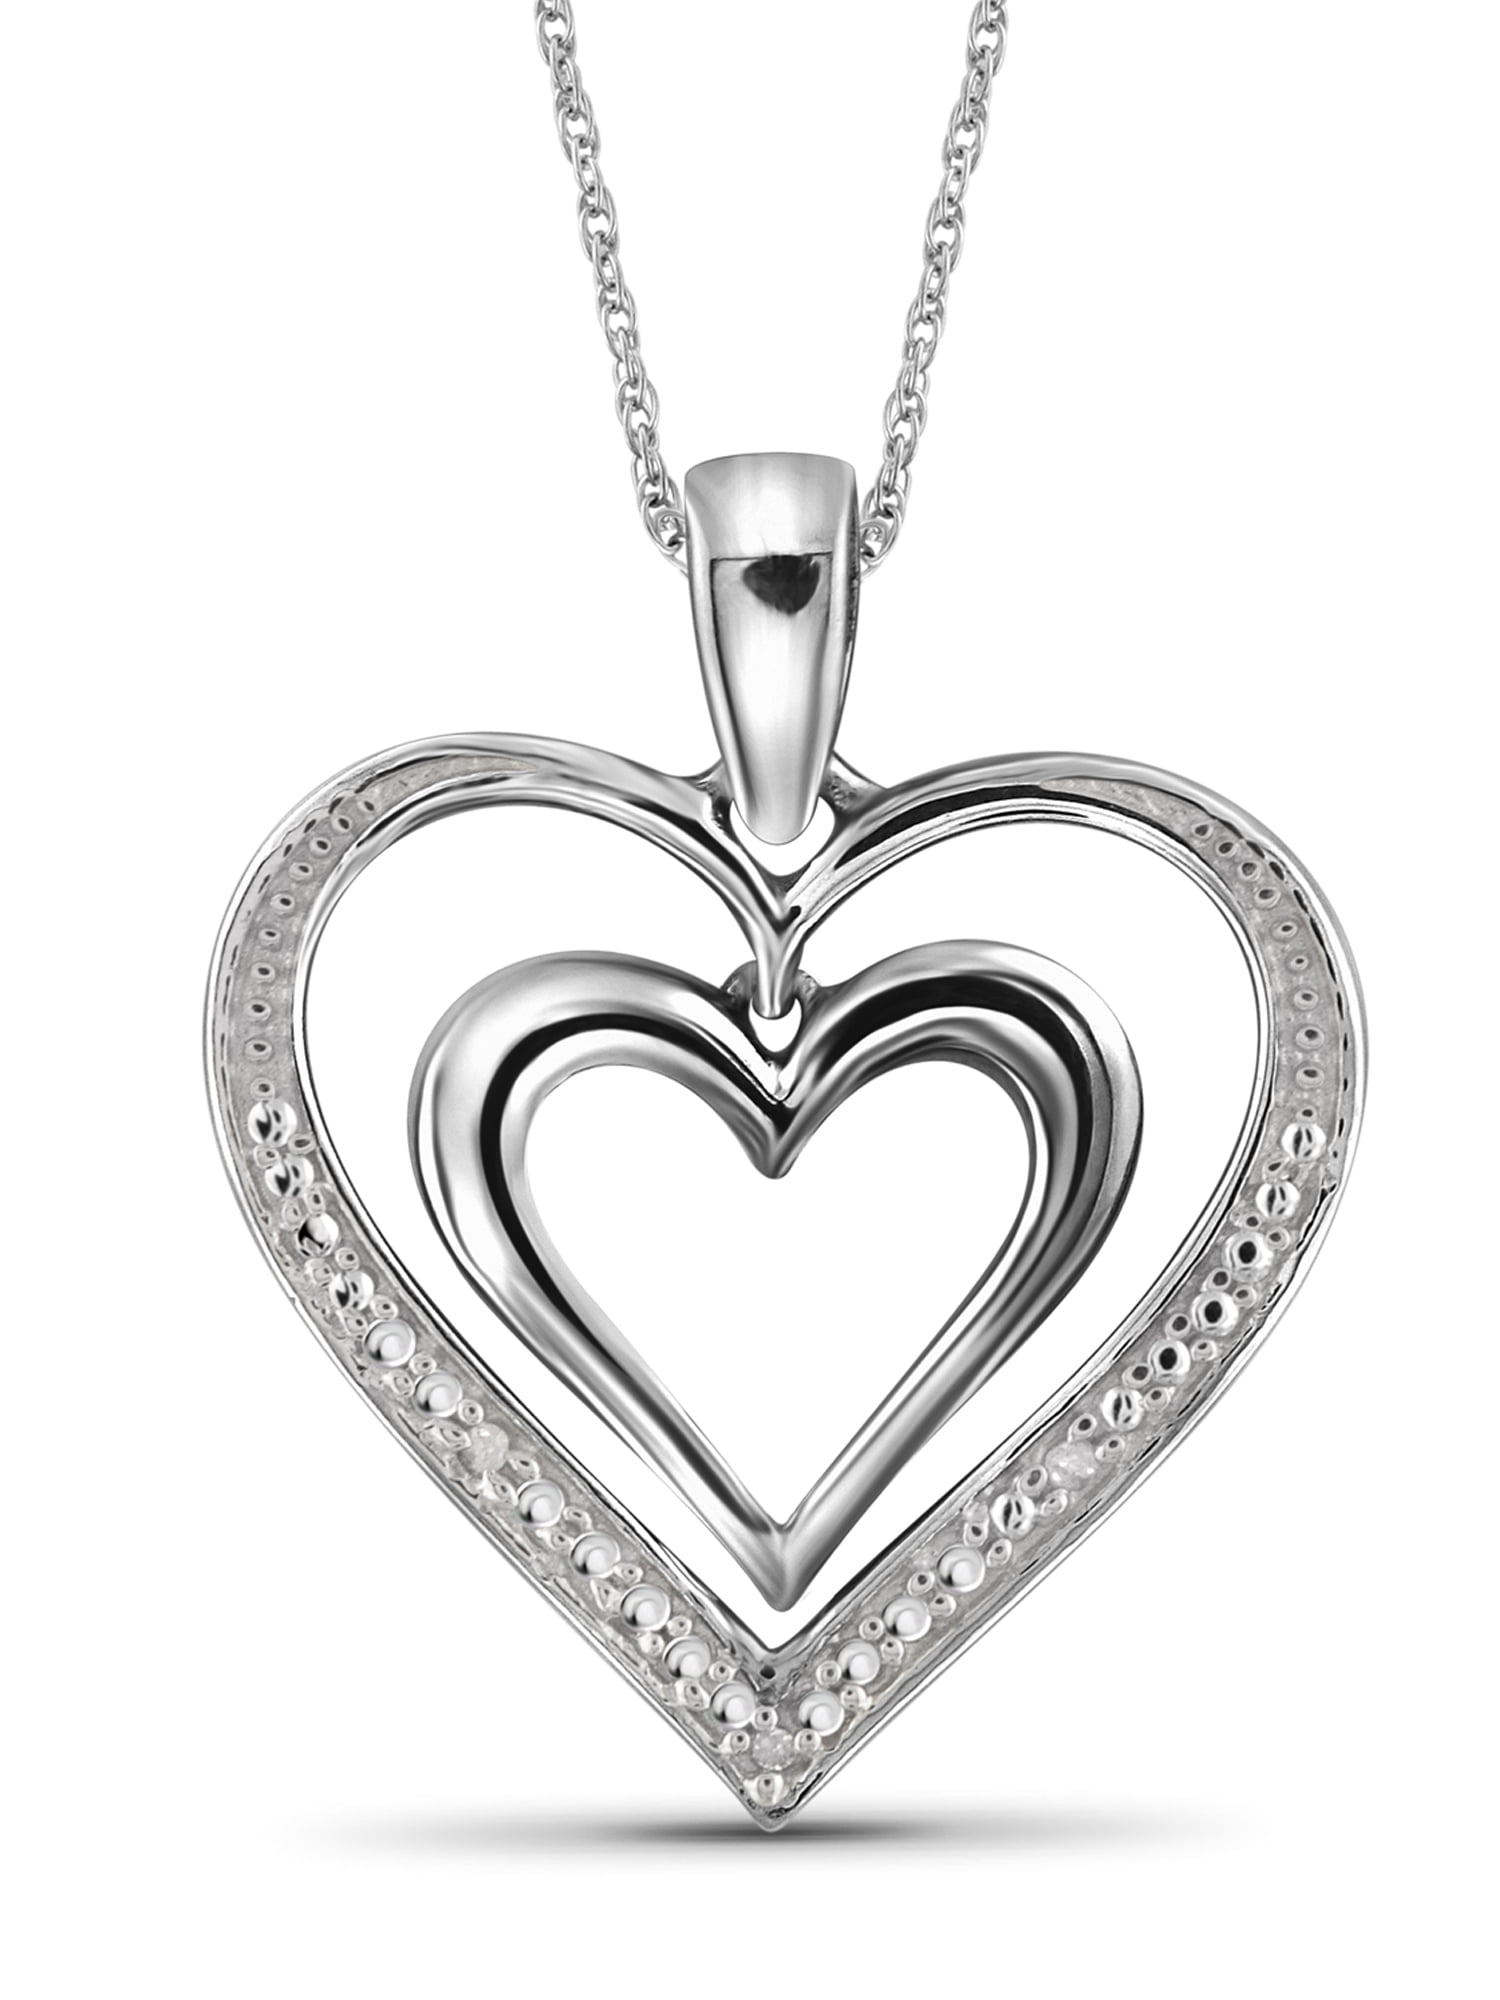 JewelersClub 0.925 Sterling Silver Heart Necklace with 0.10 Carat White  Diamonds | Jewelry Pendant Necklaces for Women White Diamonds & 18 inch  Rope